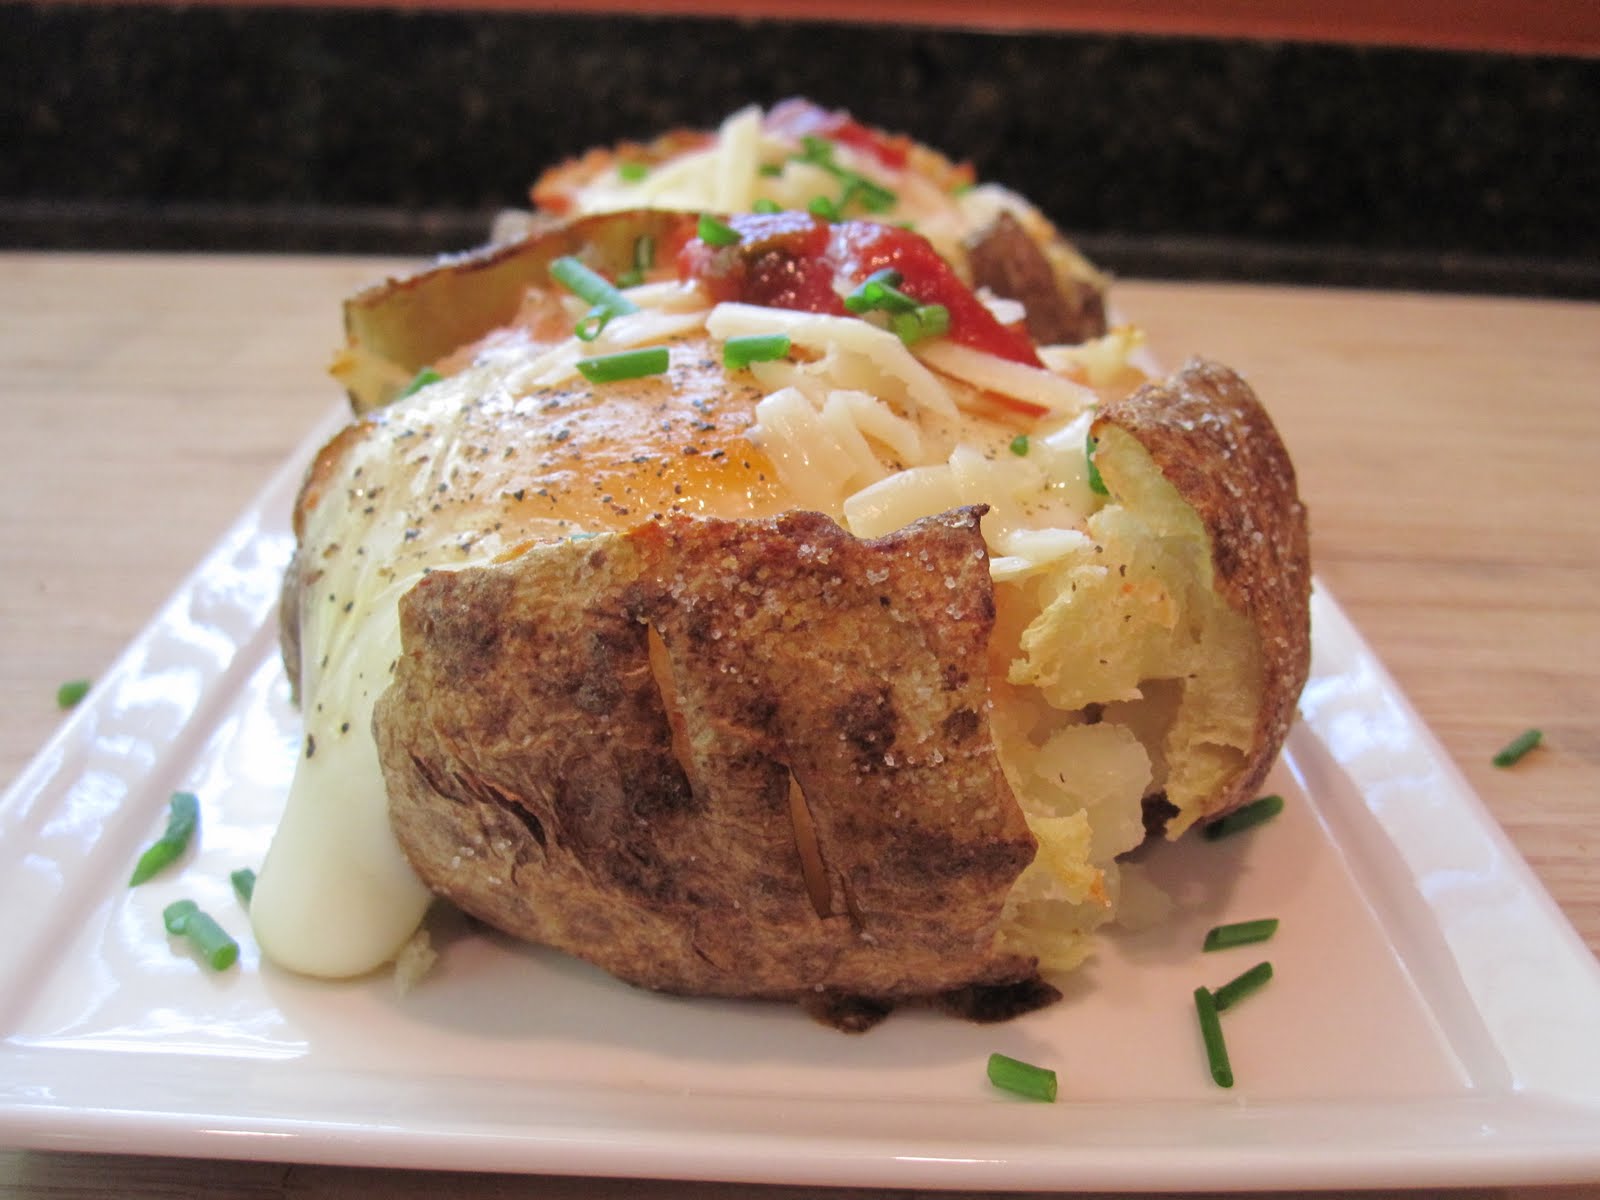 Stirring the Pot: Eggs in Baked Potatoes